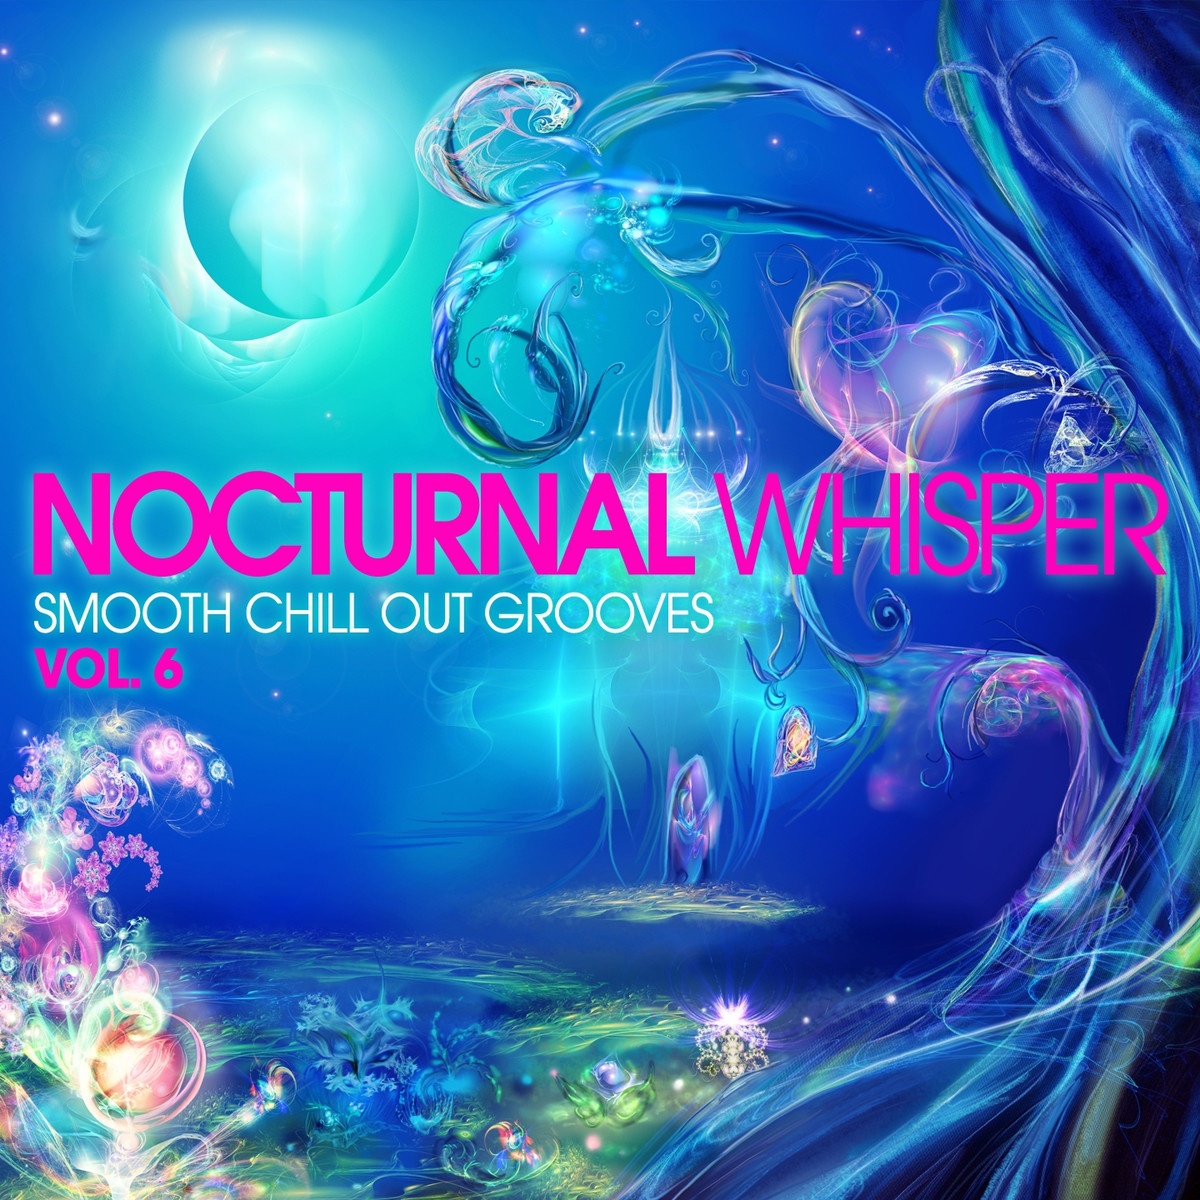 Nocturnal Whisper, Vol. 6 (Smooth Chill Out Grooves)